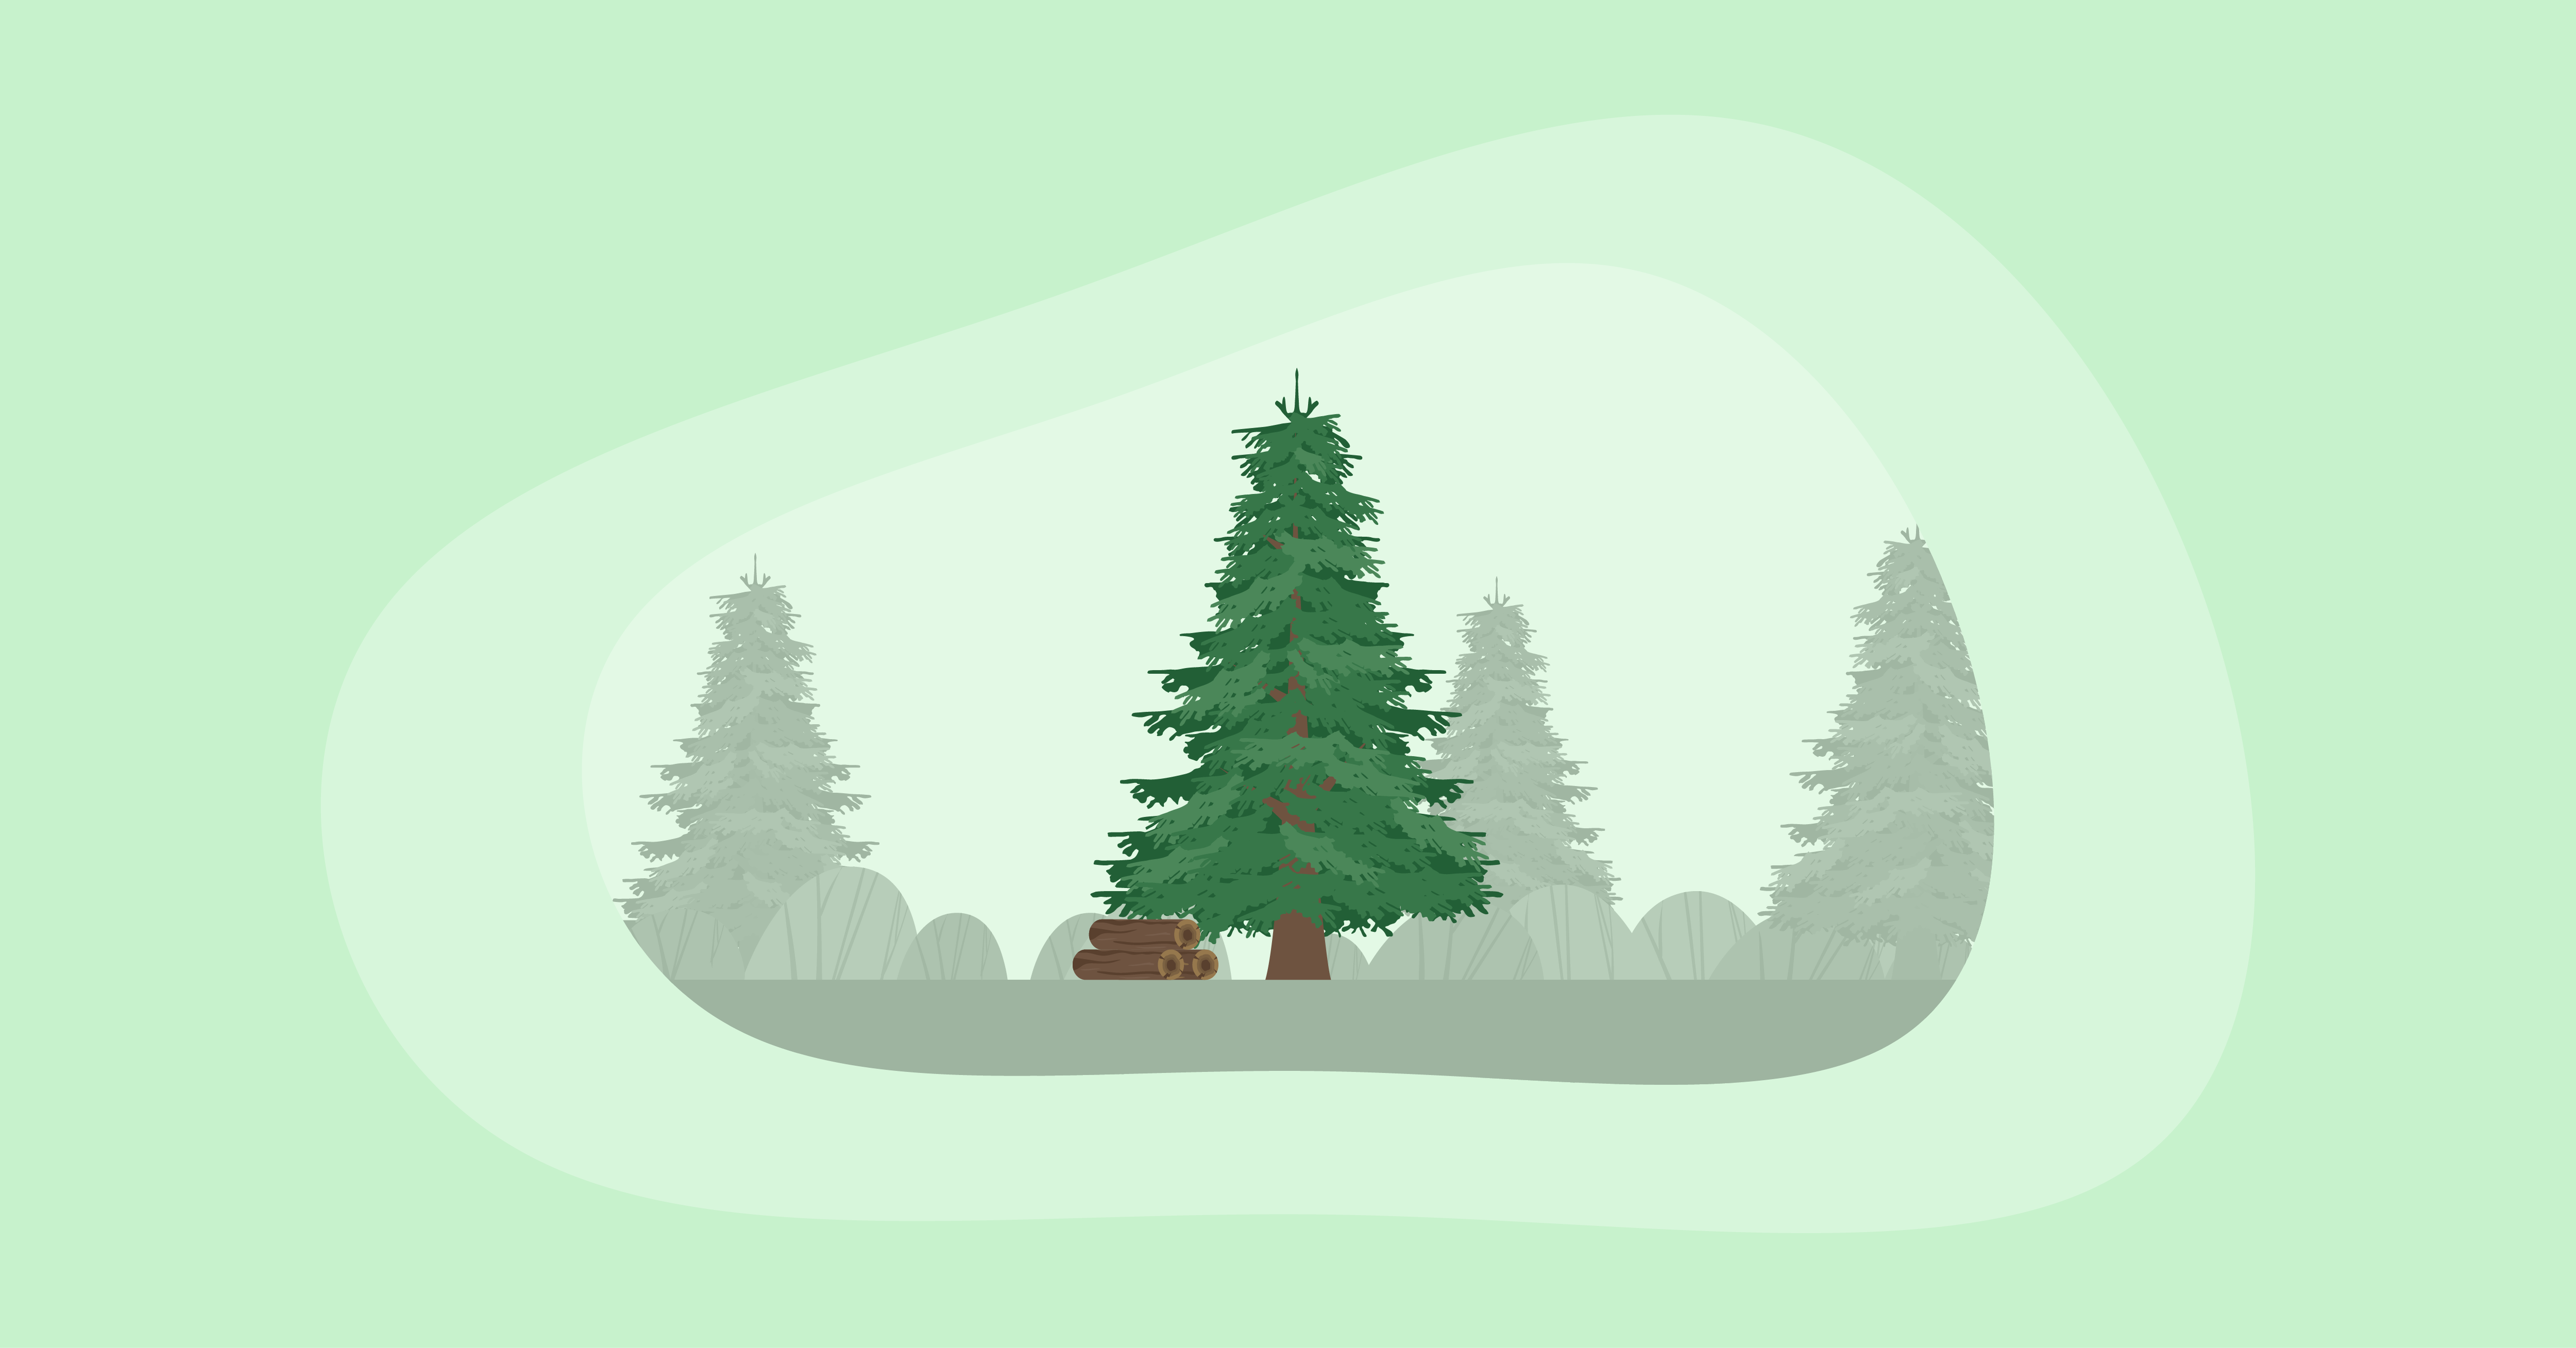 Illustration of a spruce tree and wood